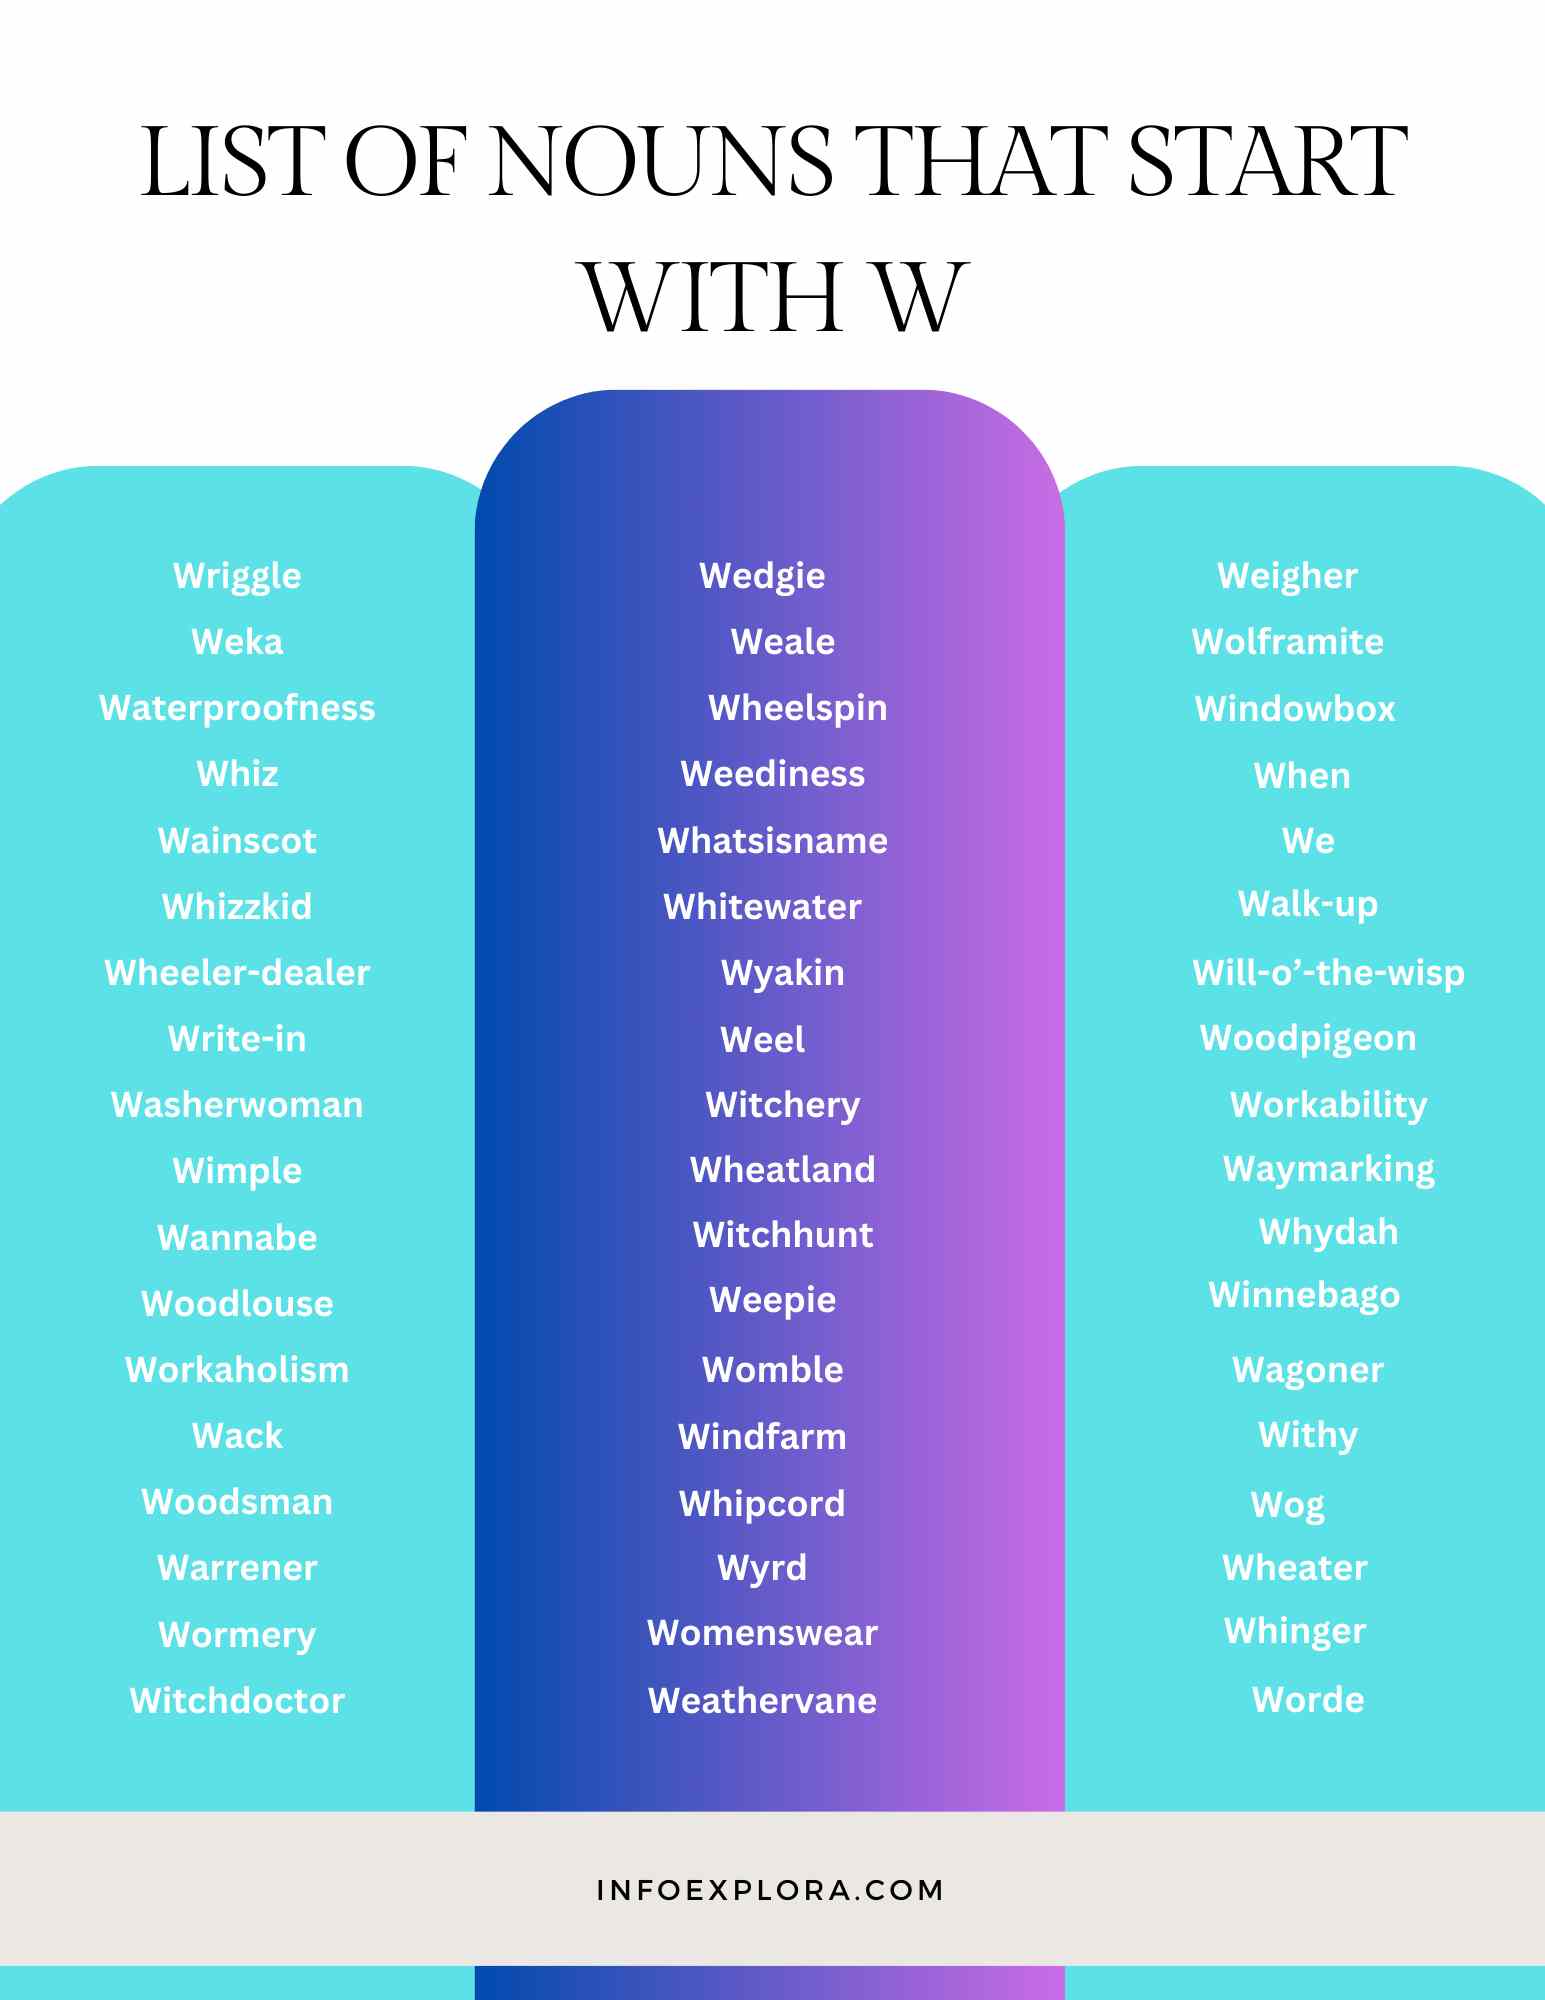 Nouns that Start With W